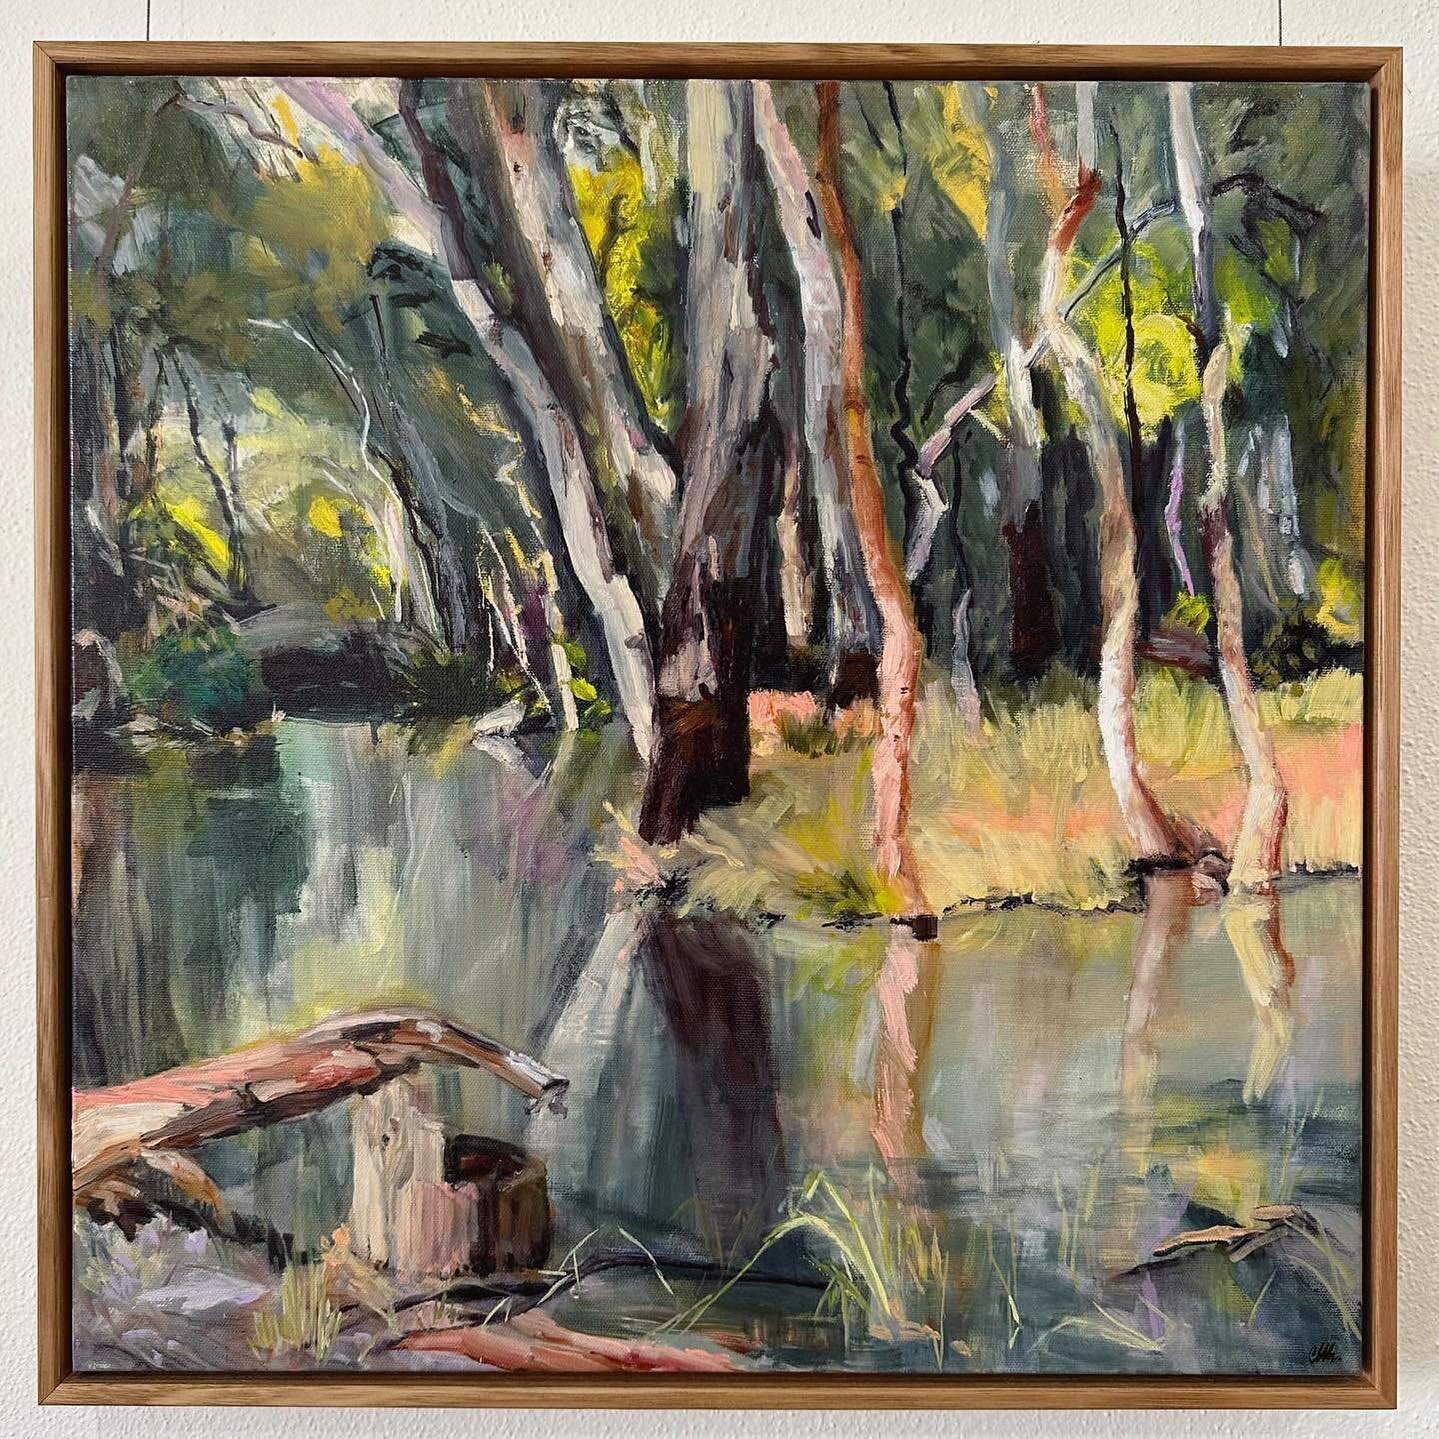 Posted @withregram &bull; @satchandcogallery The stunning reflections in &lsquo;Here I Whisper&rsquo; 53x53cm framed oil by @melindagiblett_art

Please DM or 0407343528 for enquiries.  All works are on the gallery website.
&bull;
&bull;
&bull;
#austr